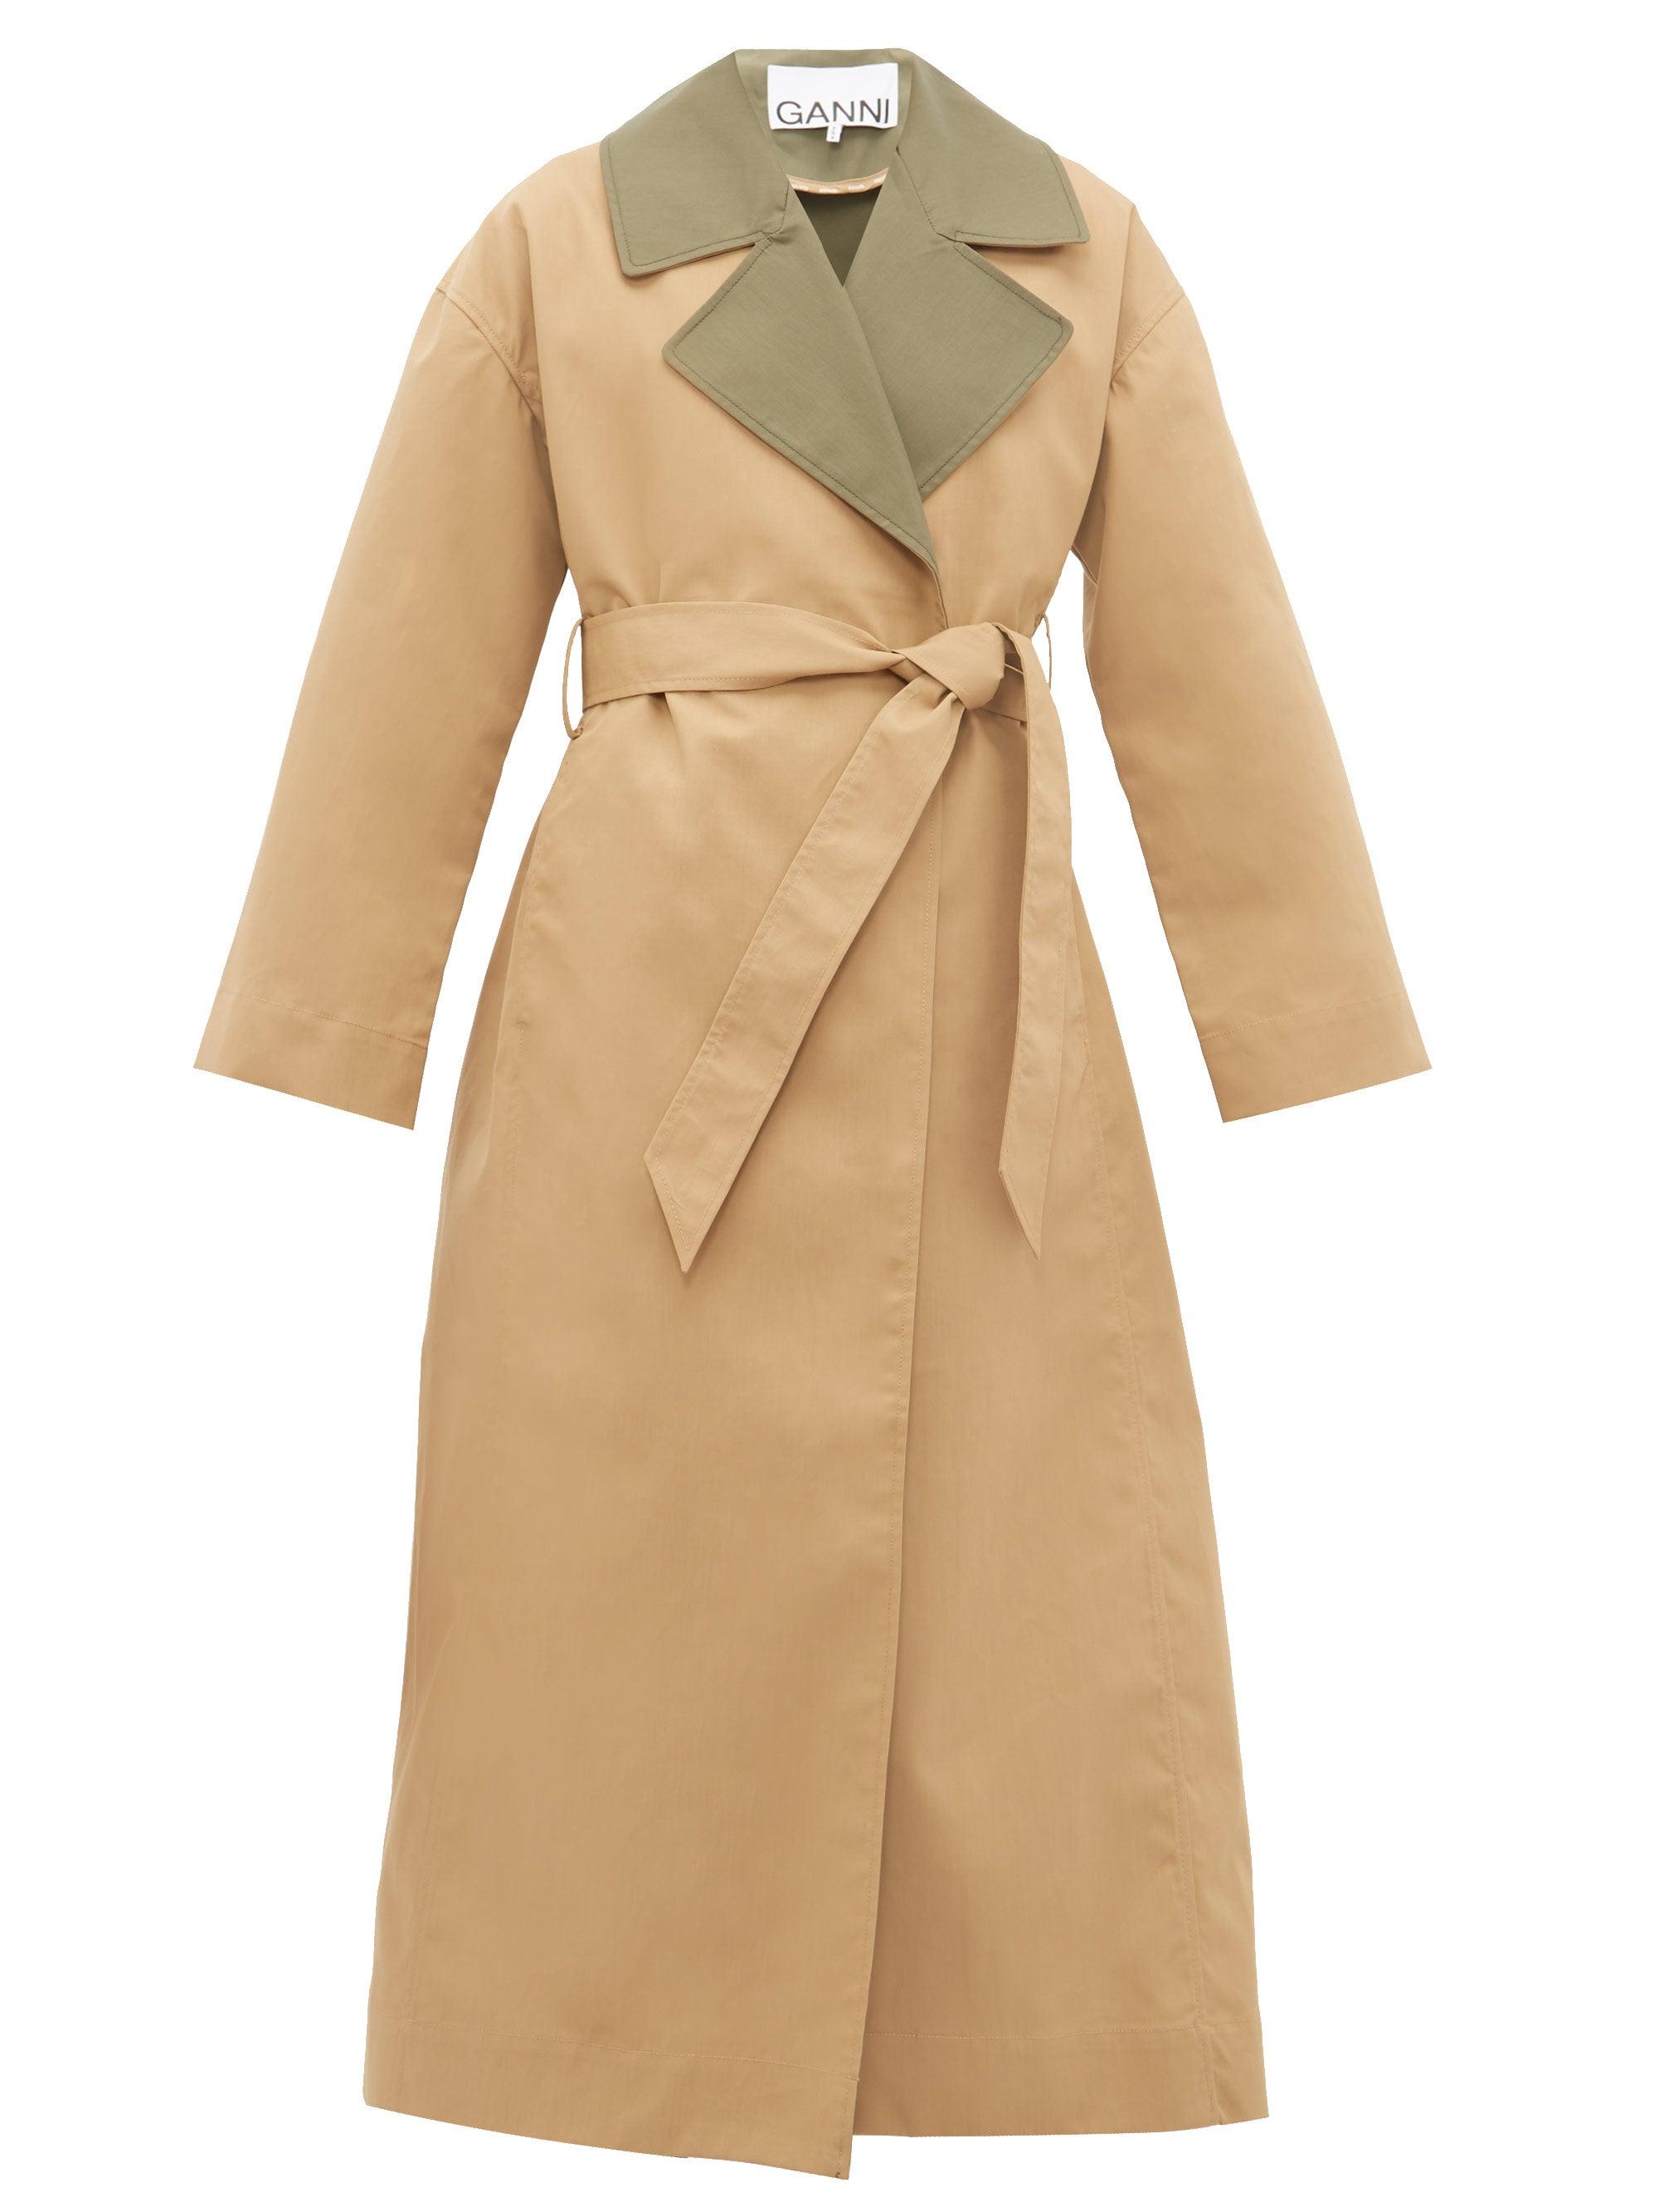 Ganni Contrast Collar Tie-waist Trench Coat in Natural | Lyst